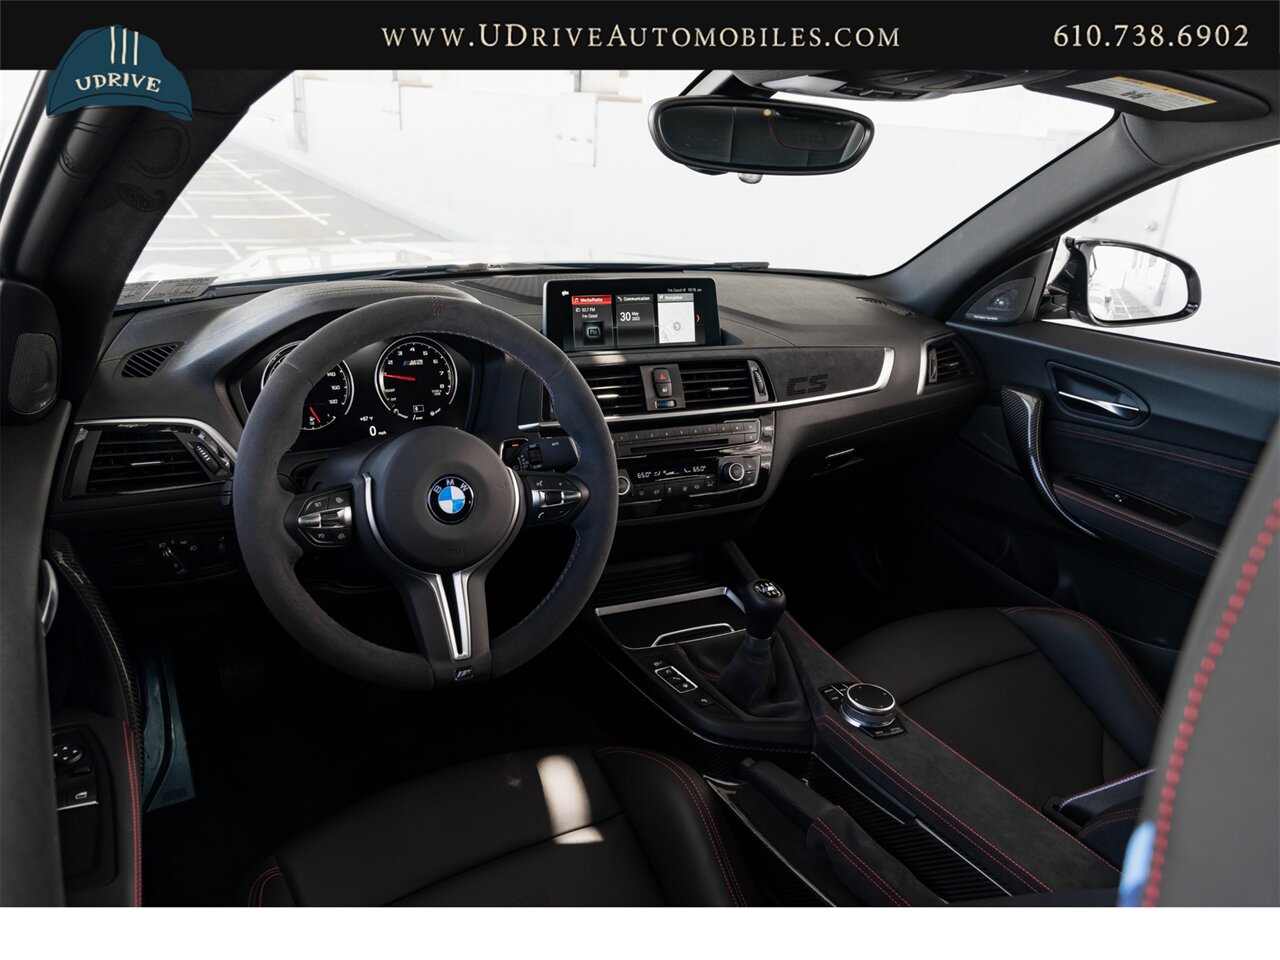 2020 BMW M2 CS  M2 CS 6 Speed Manual 2k Miles Full Body PPF Factory Warranty until 2025 - Photo 5 - West Chester, PA 19382